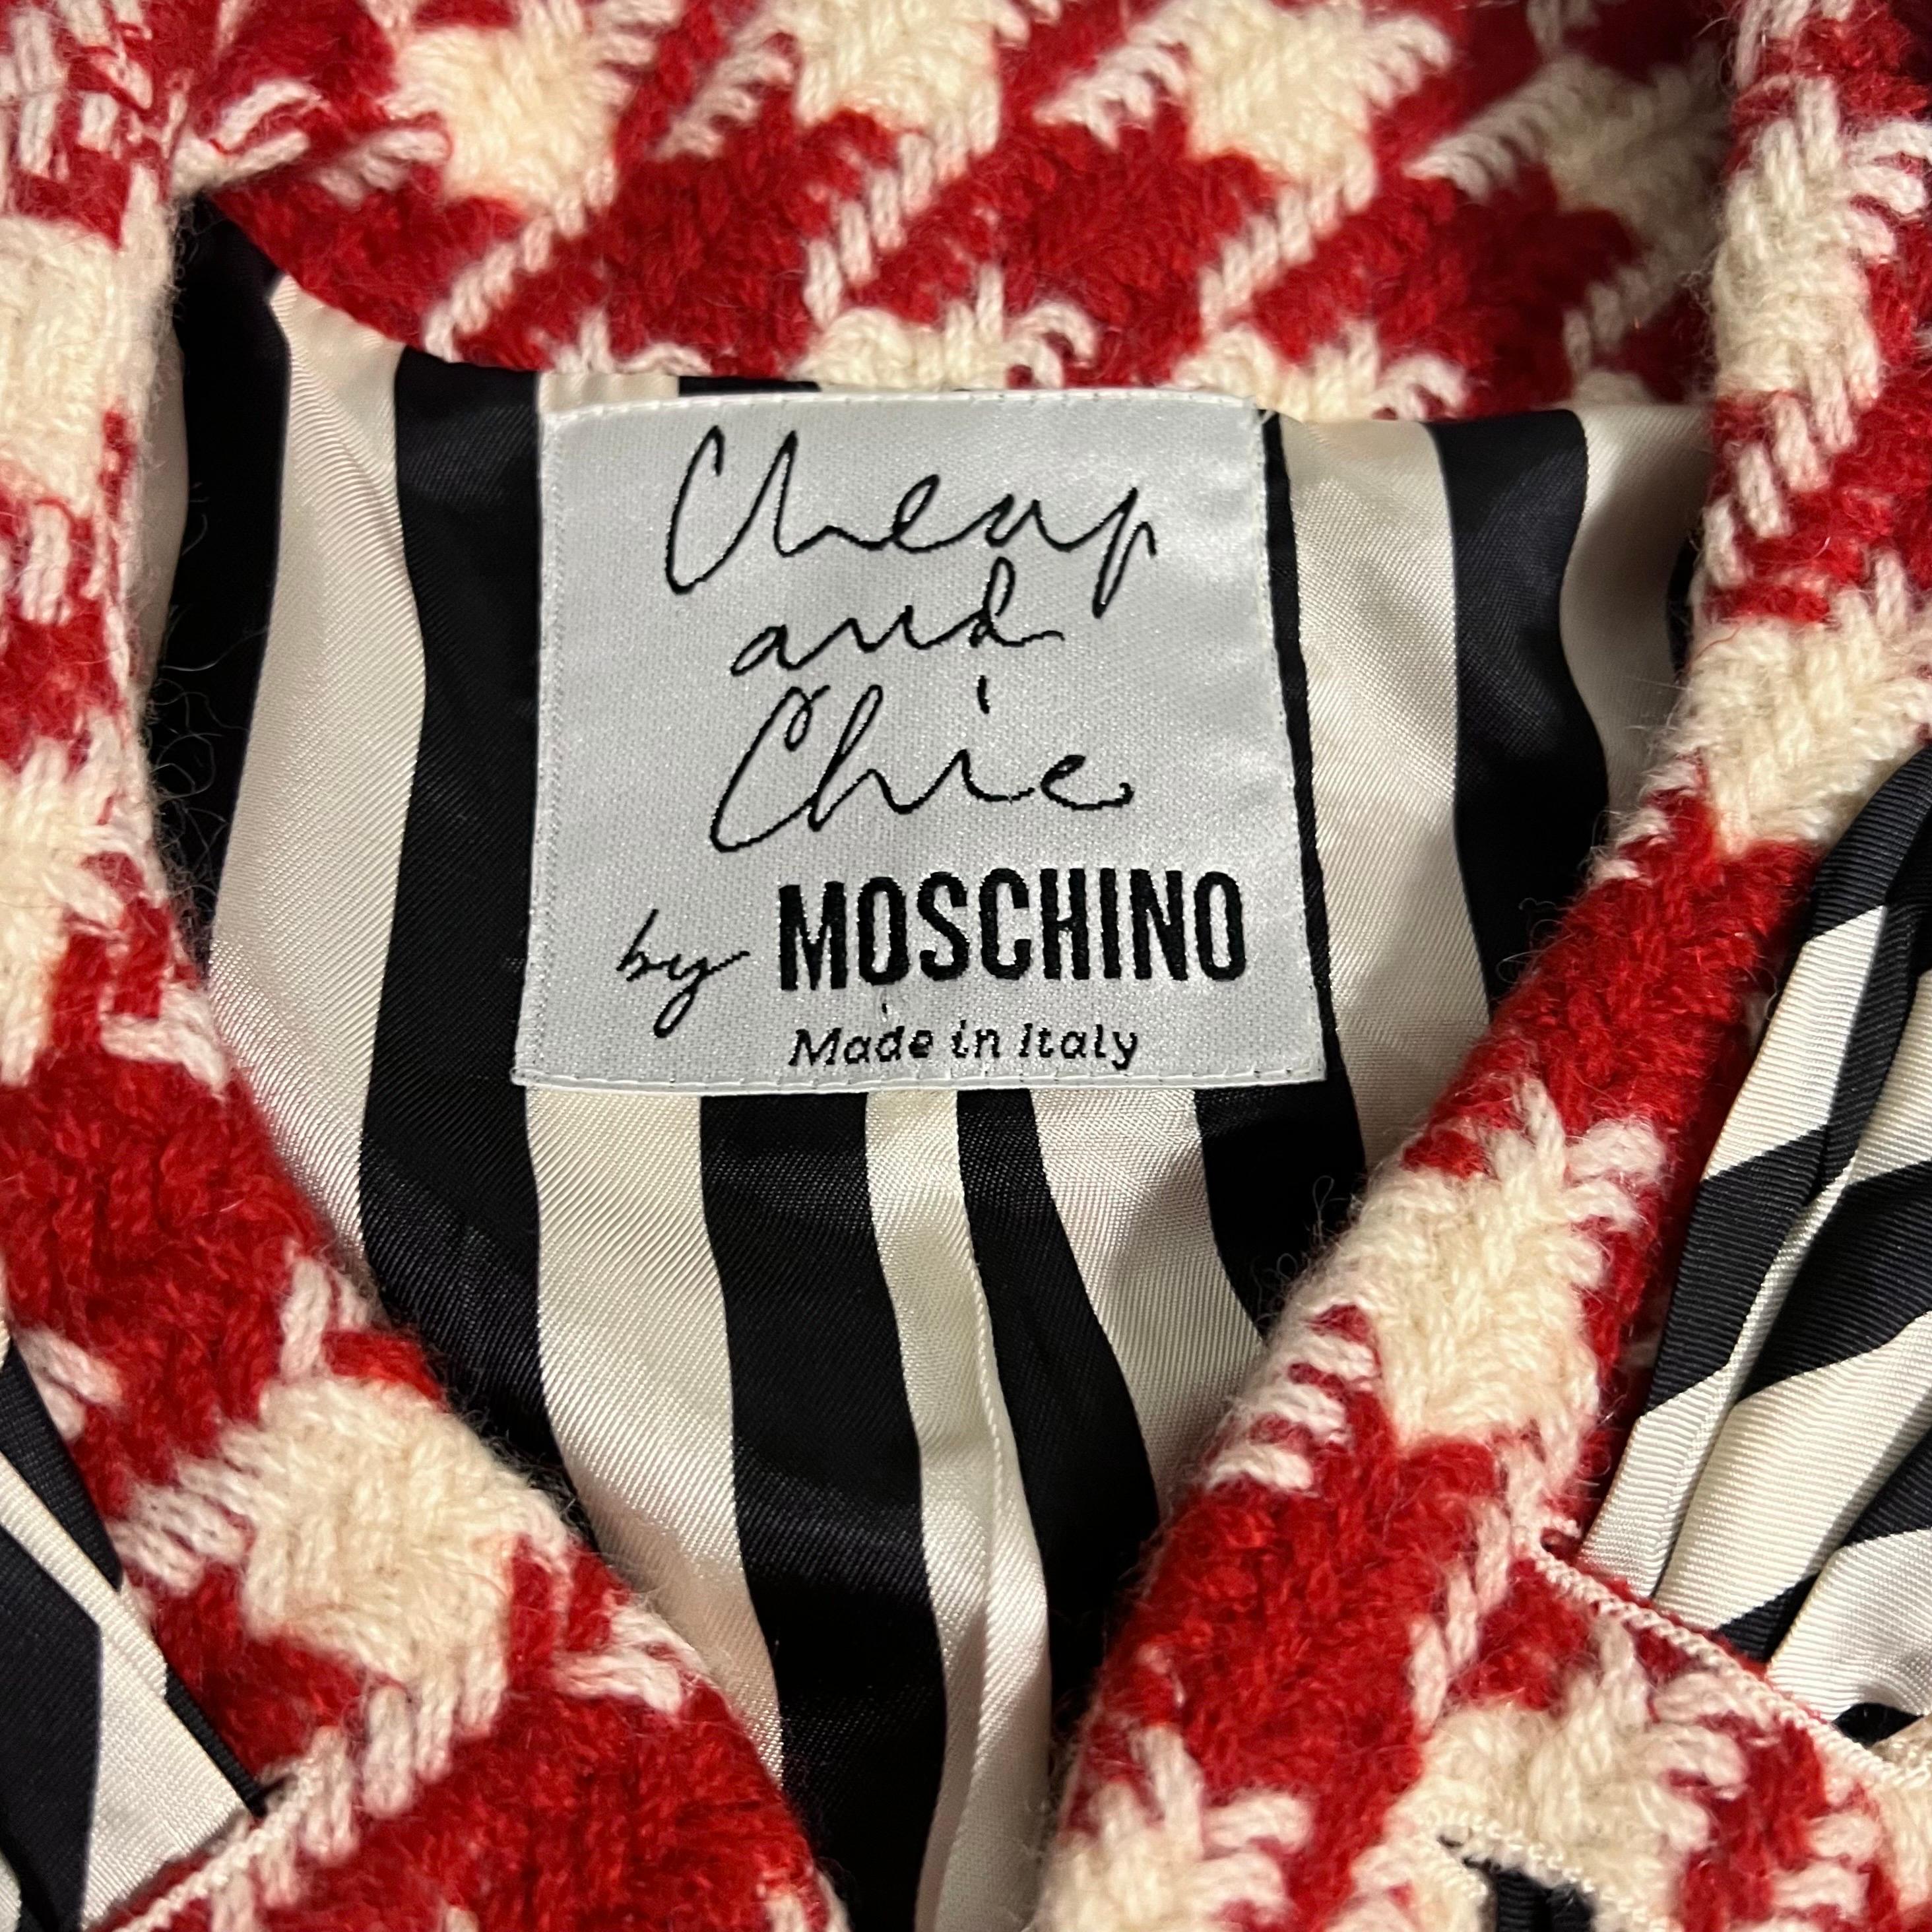 Moschino Cheap and Chic Vintage Houndstooth Jacket as seen on Princess Diana 4